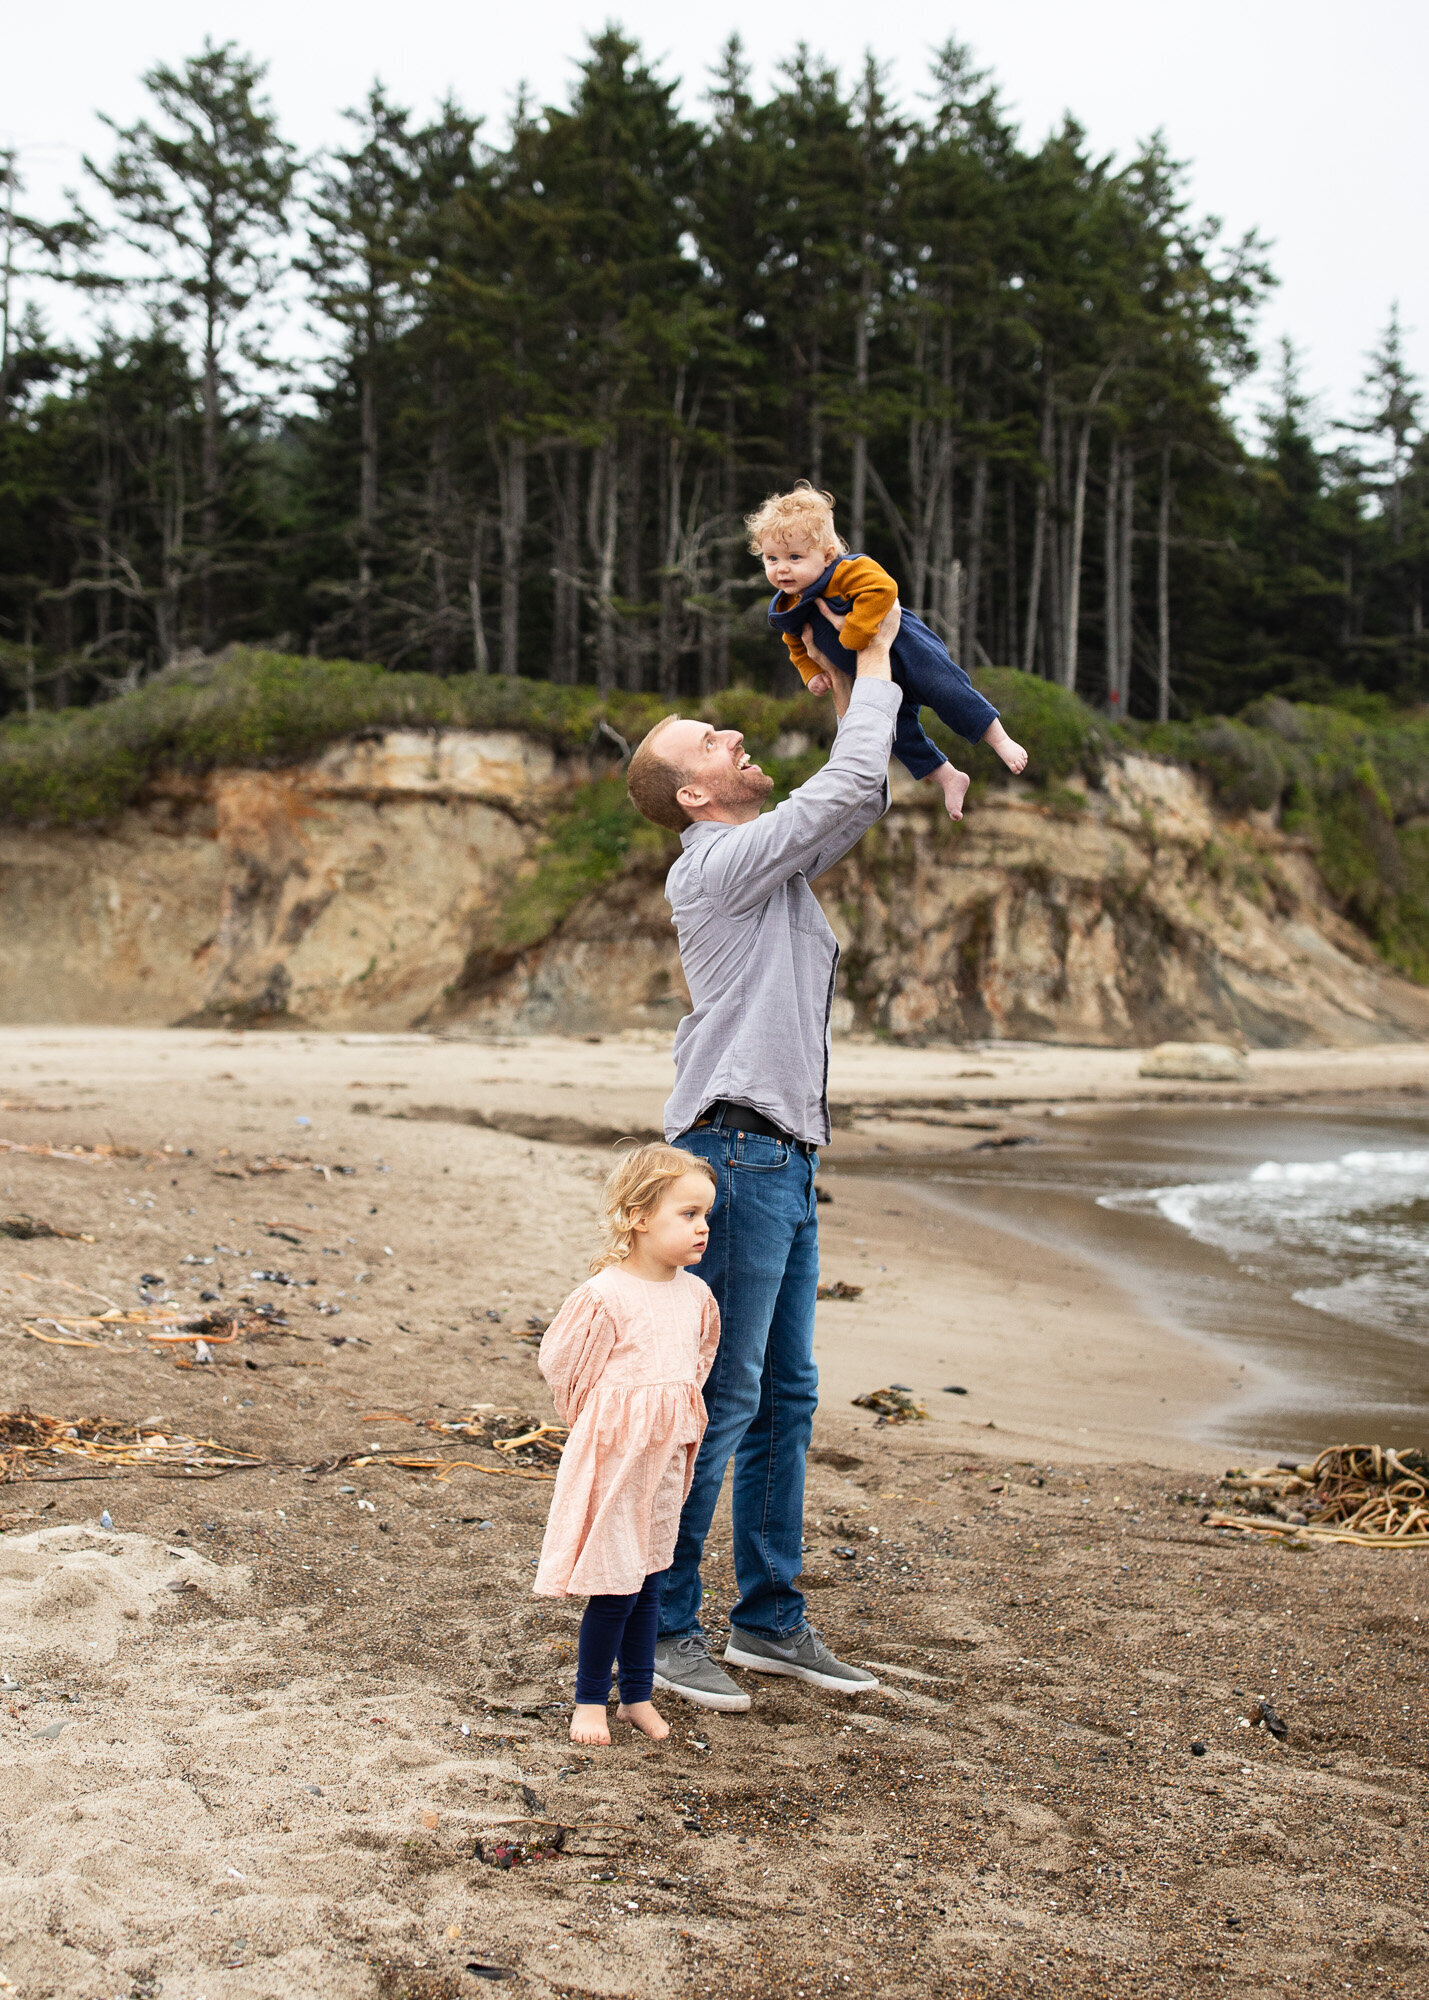 Dad holding baby above his head with toddler at his feet on Oregon beach. Photo by Oregon coast photographer.